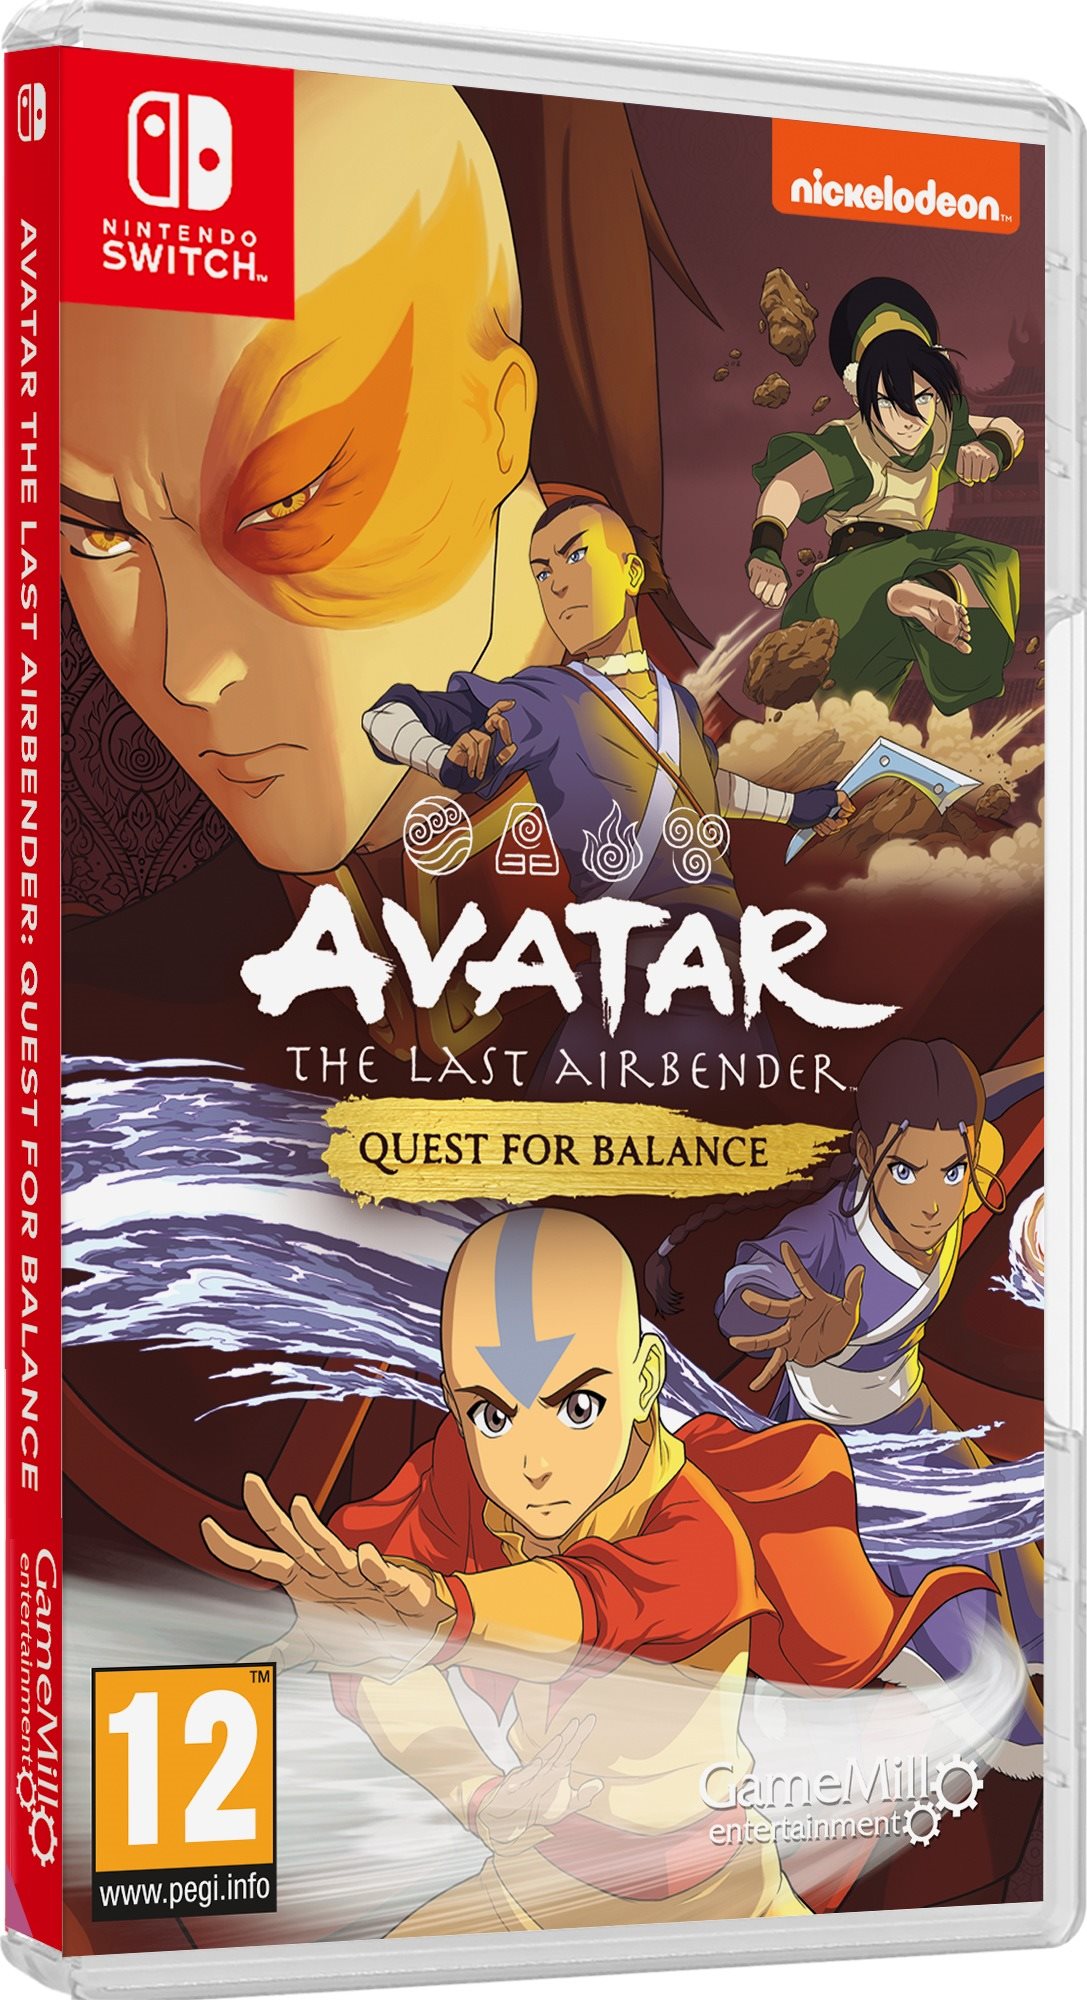 Avatar: The Last Airbender Quest for Balance - Nintendo Switch